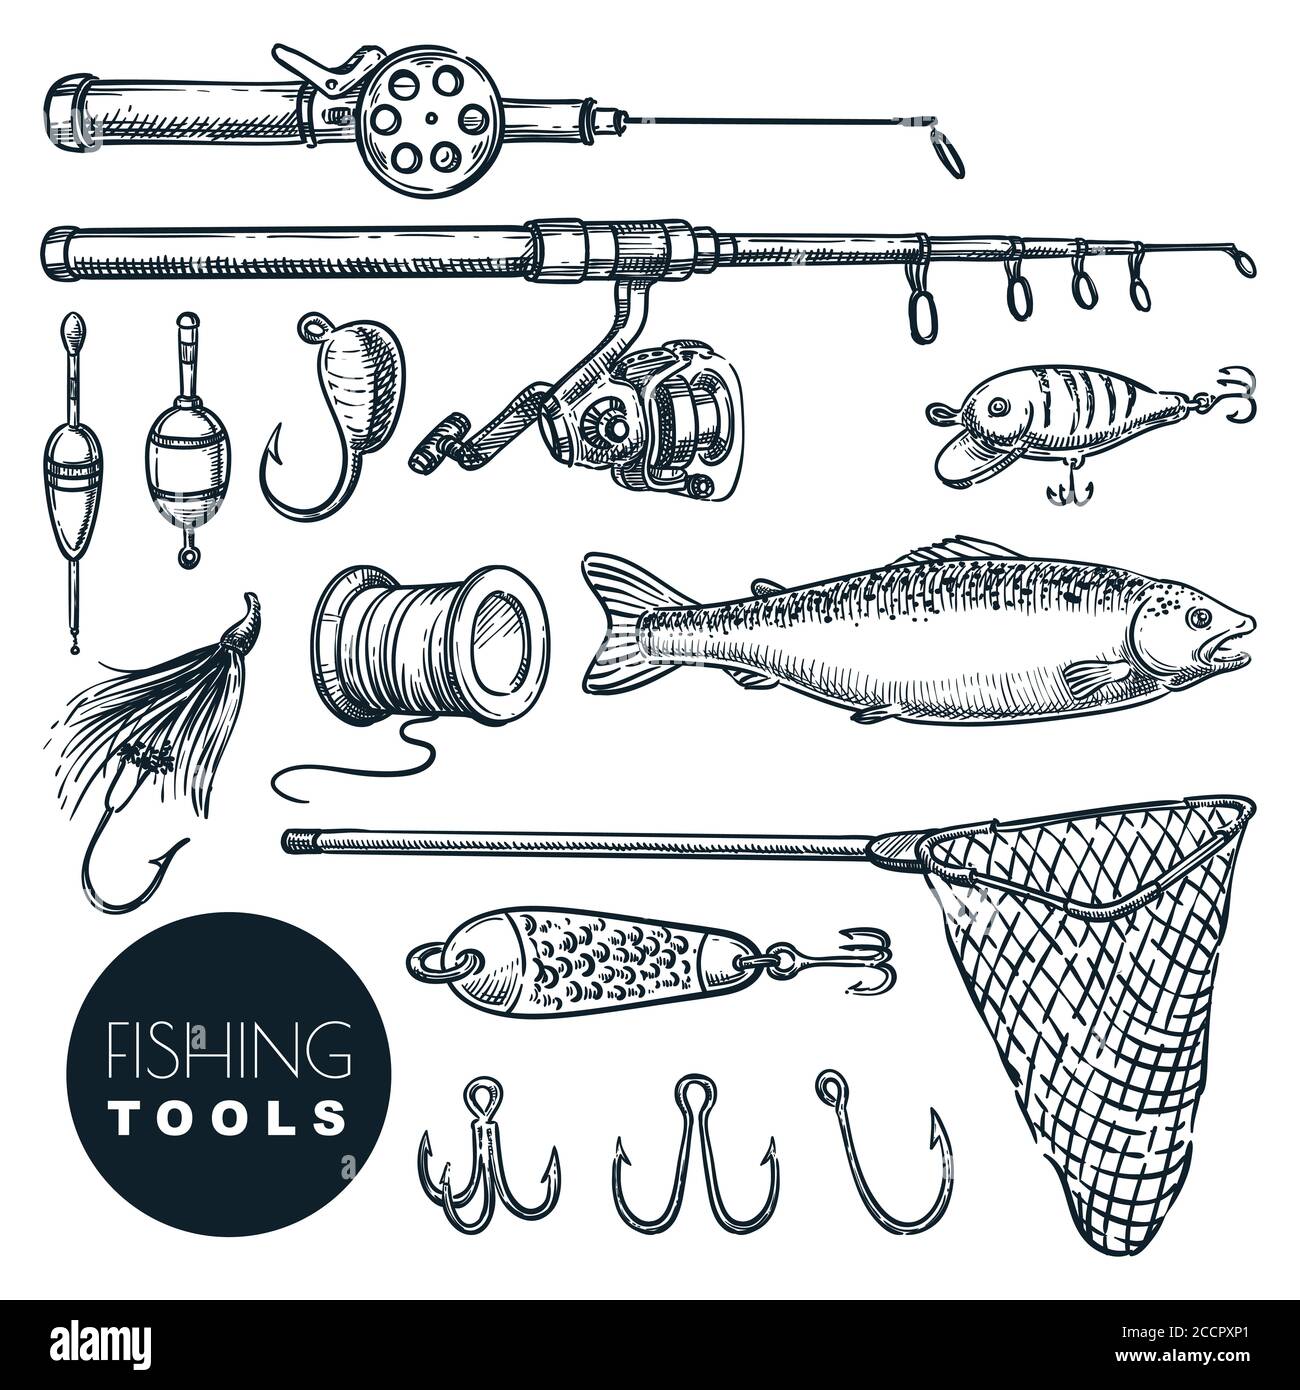 https://c8.alamy.com/comp/2CCPXP1/fishing-equipment-isolated-on-white-background-vector-hand-drawn-sketch-illustration-rod-bait-hook-salmon-fish-tackle-icon-set-2CCPXP1.jpg